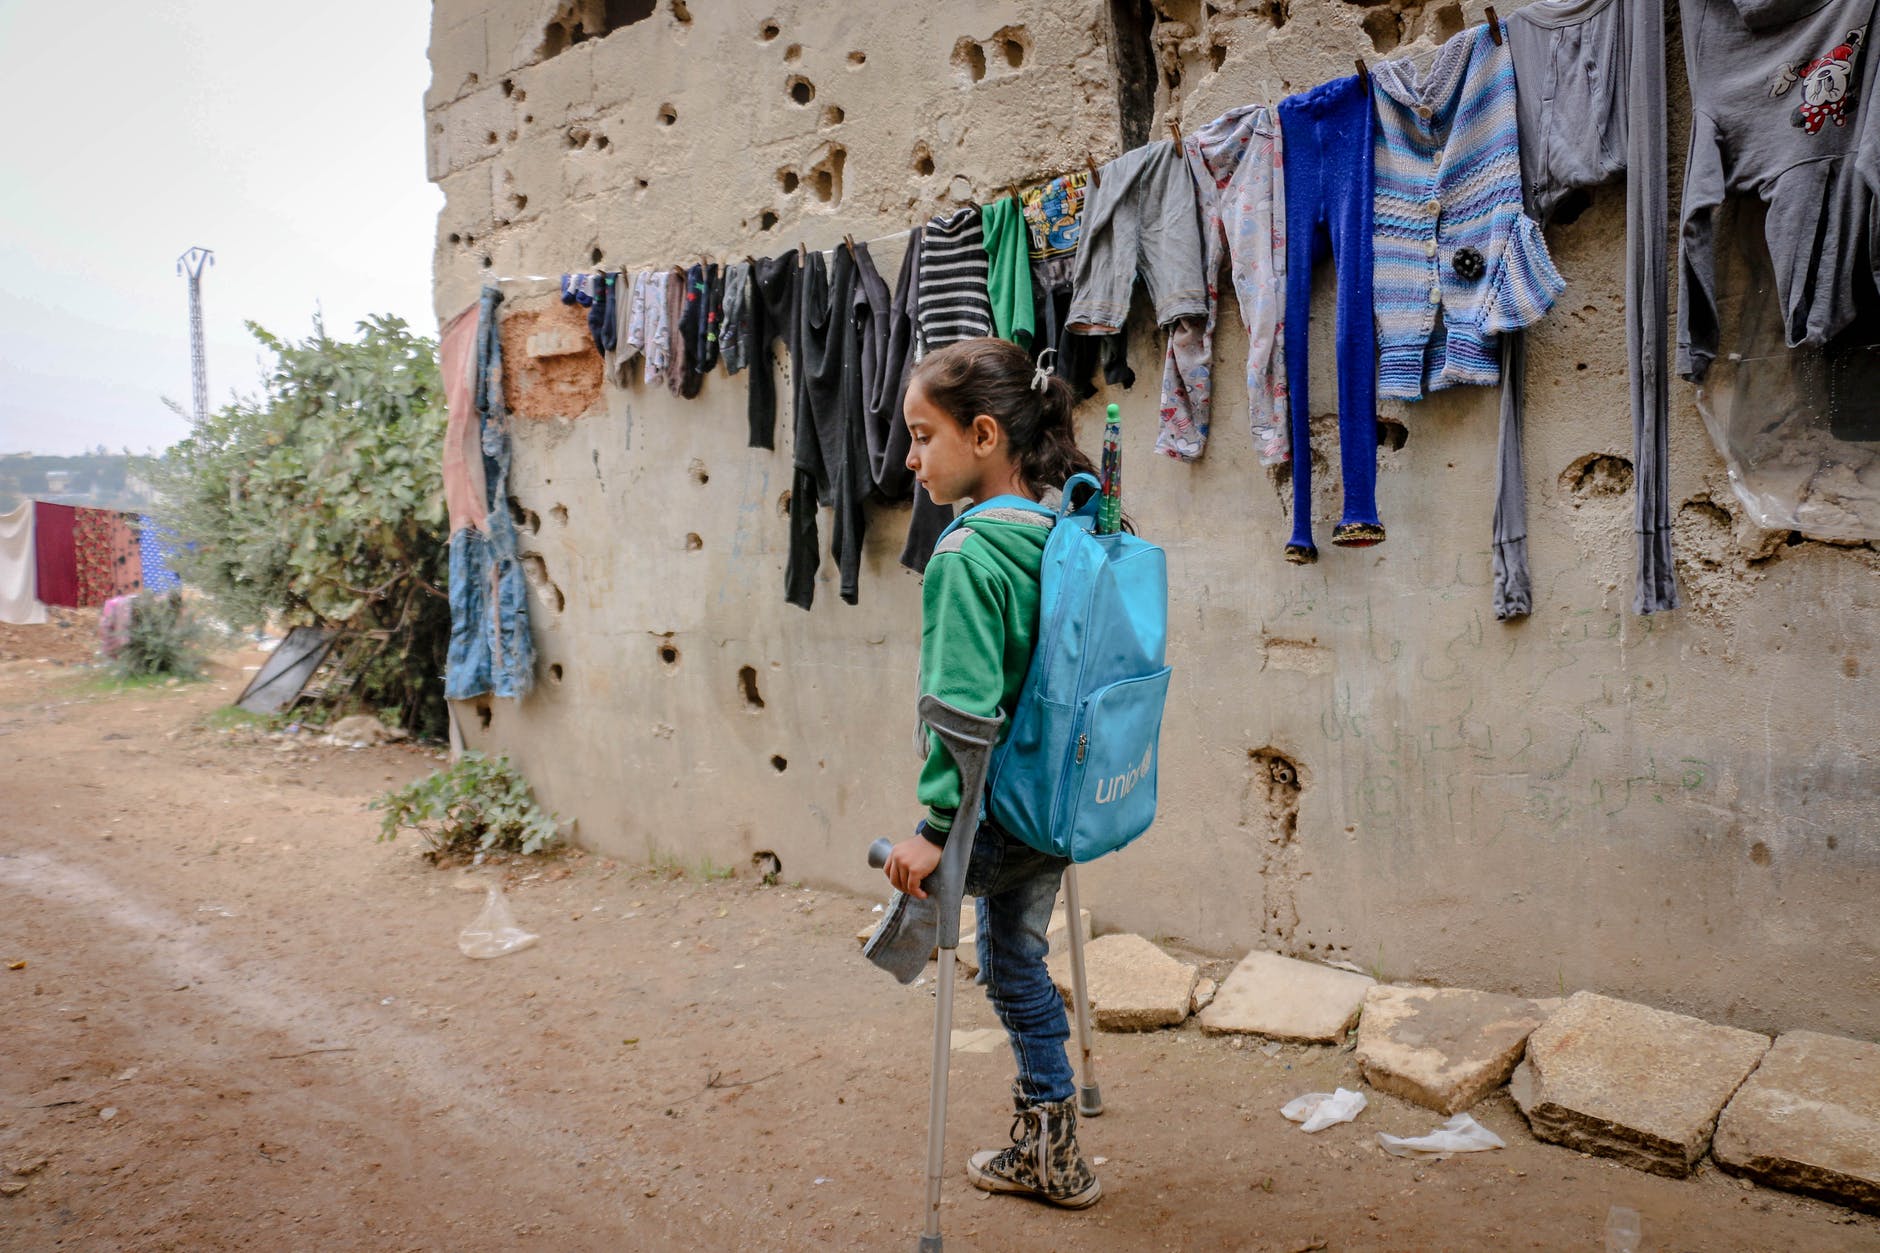 Disabled girl with one leg using crutches to move around in the street, wearing a unicef backpack